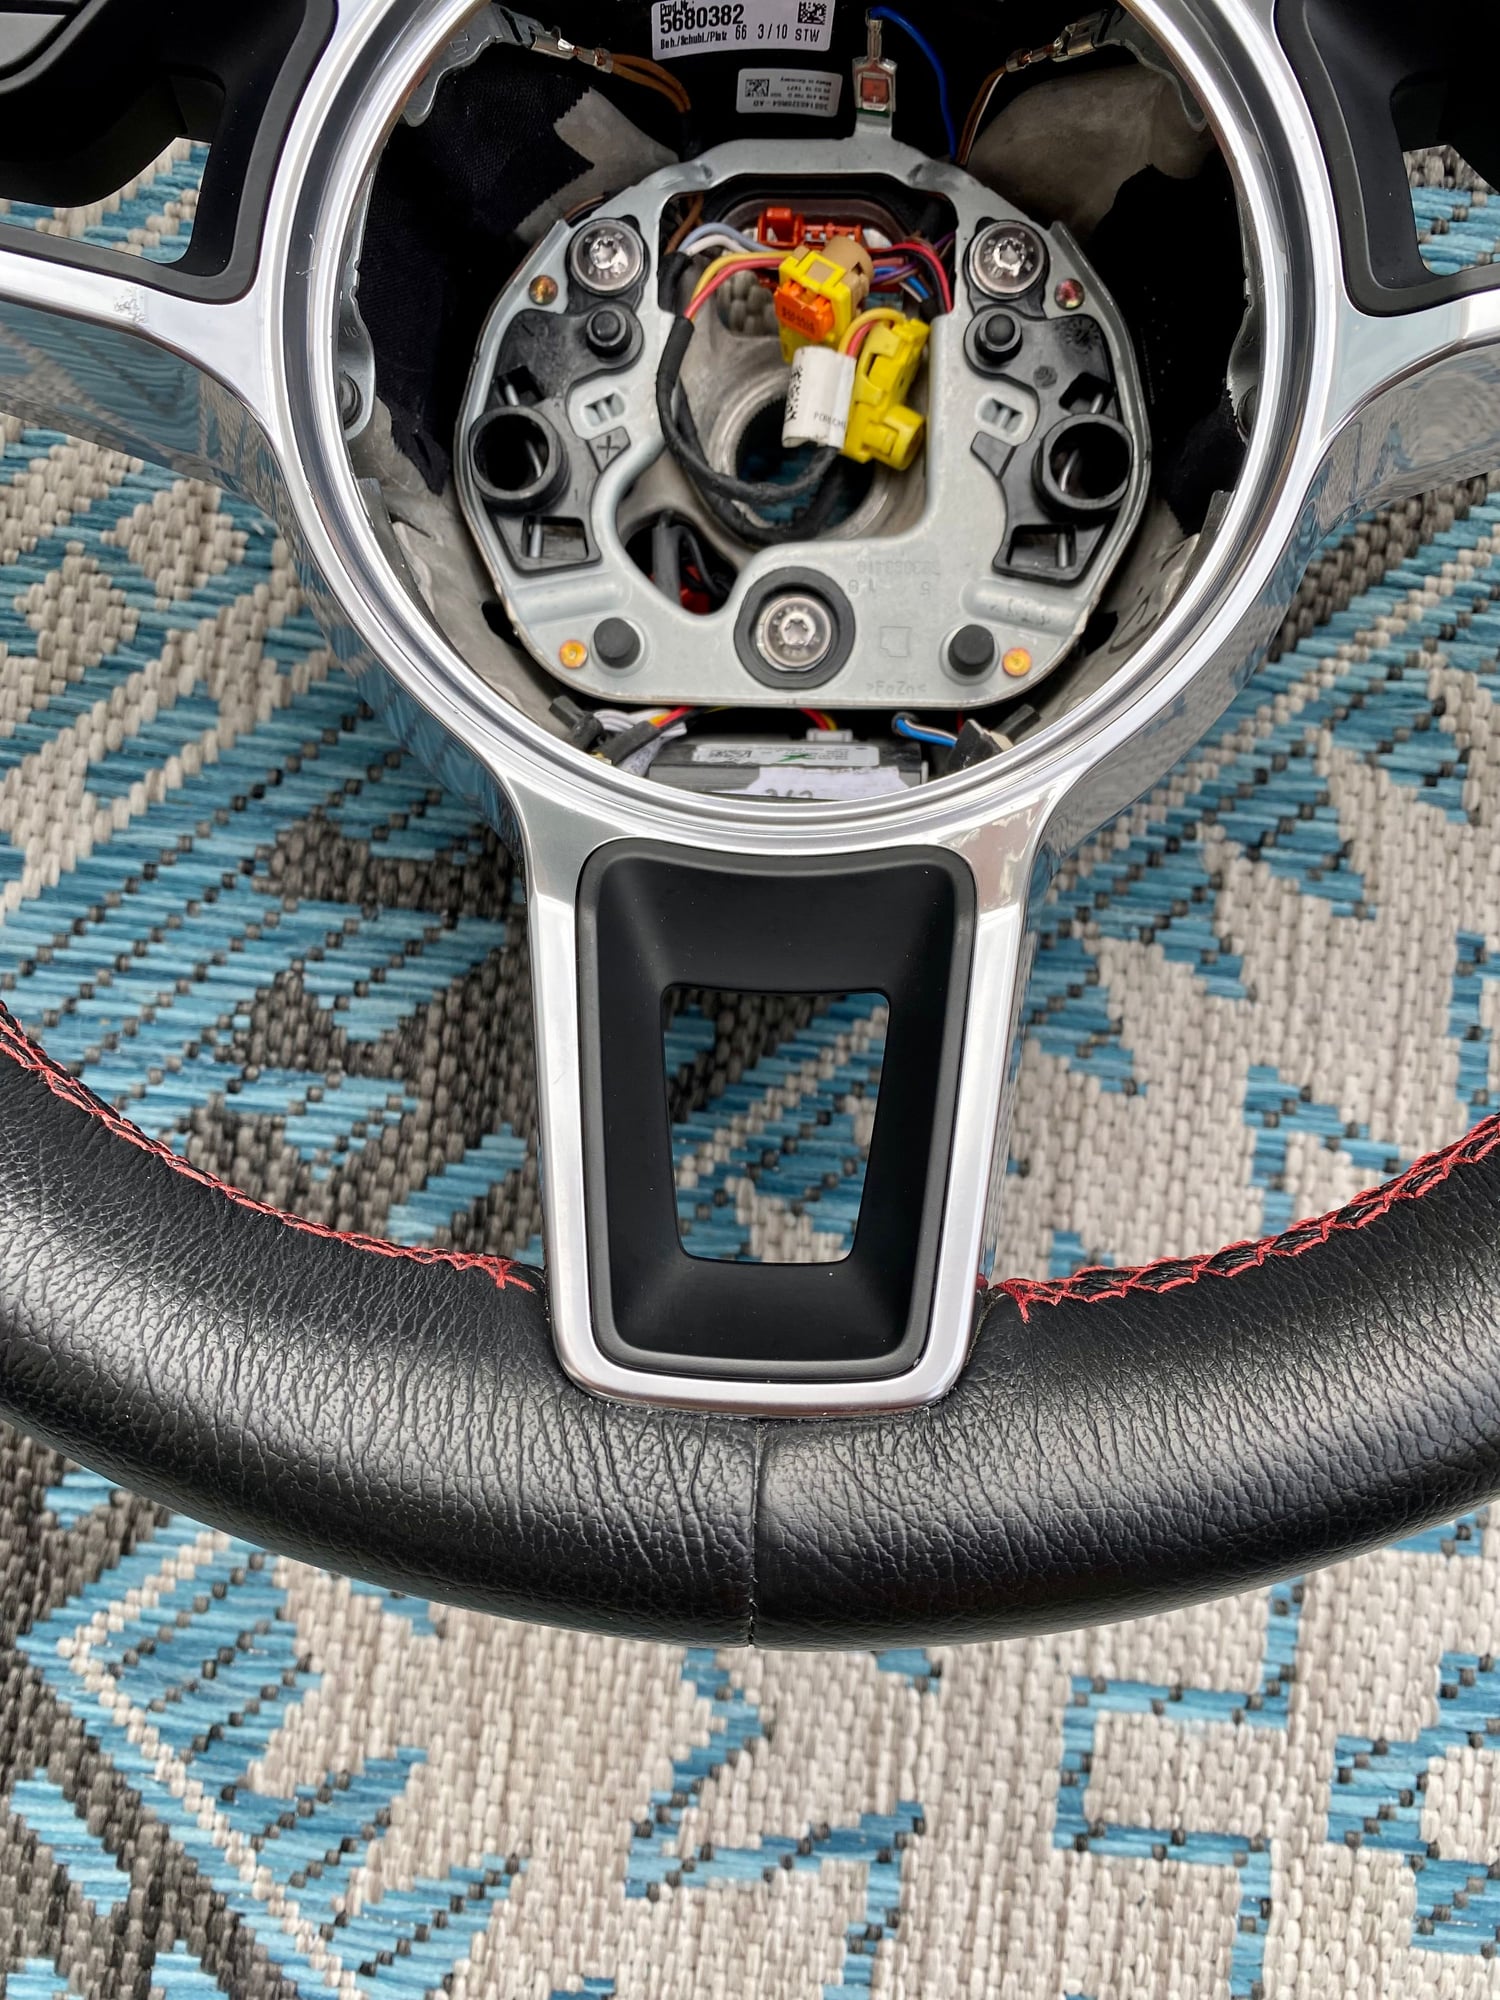 Steering/Suspension - Steering Wheels - Used - All Years Porsche All Models - Niagara Falls, NY 14304, United States